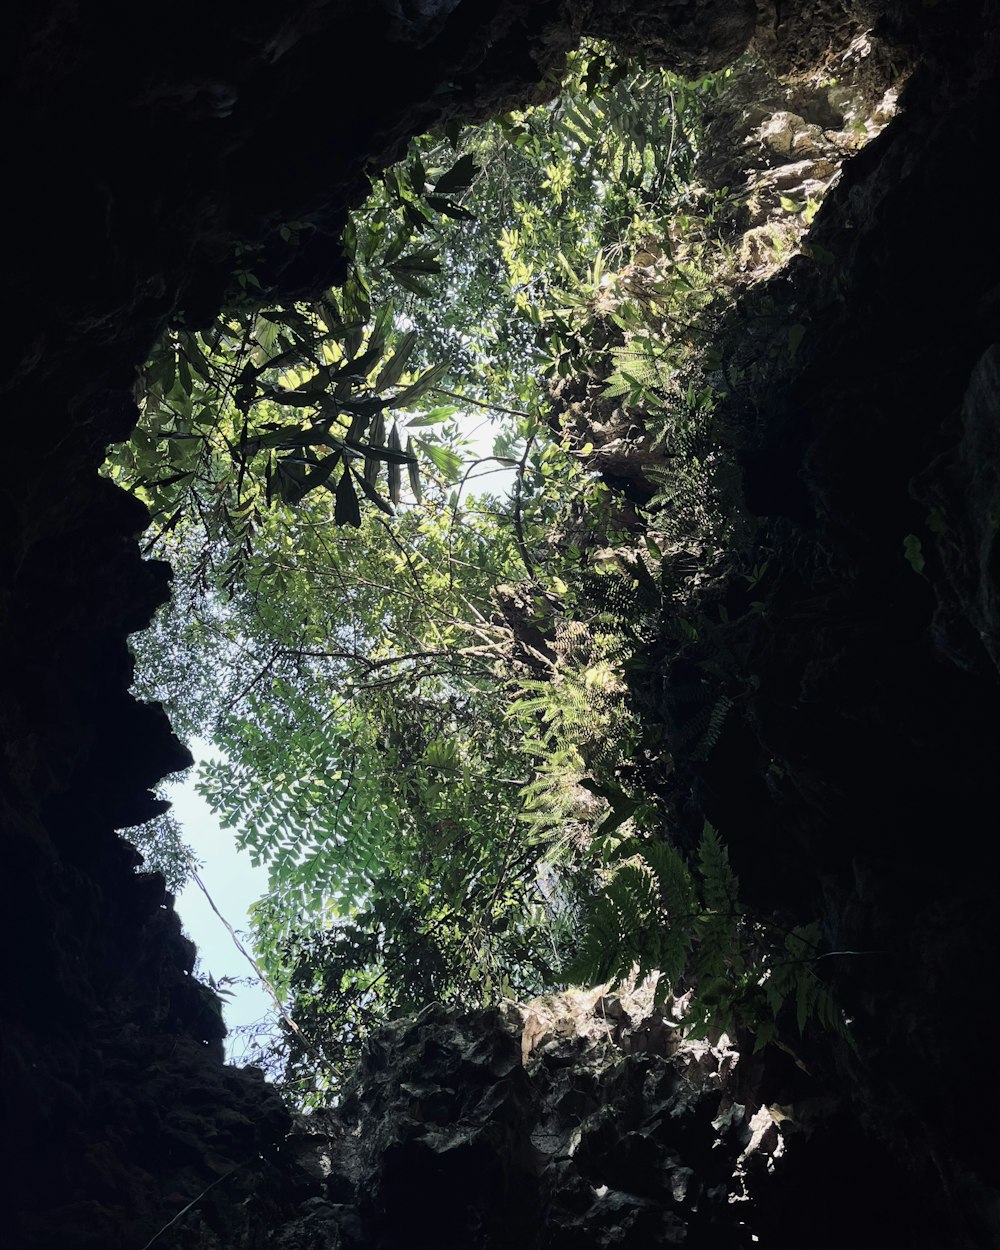 looking up into the canopy of a tree in a cave